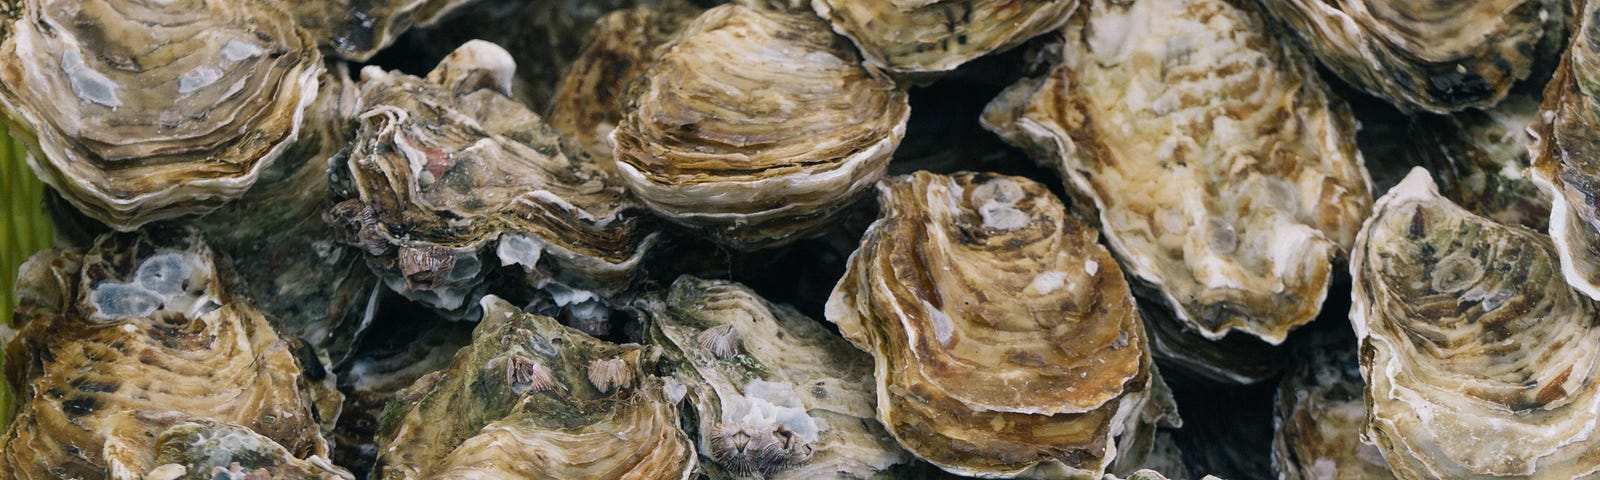 a scattered field of oysters